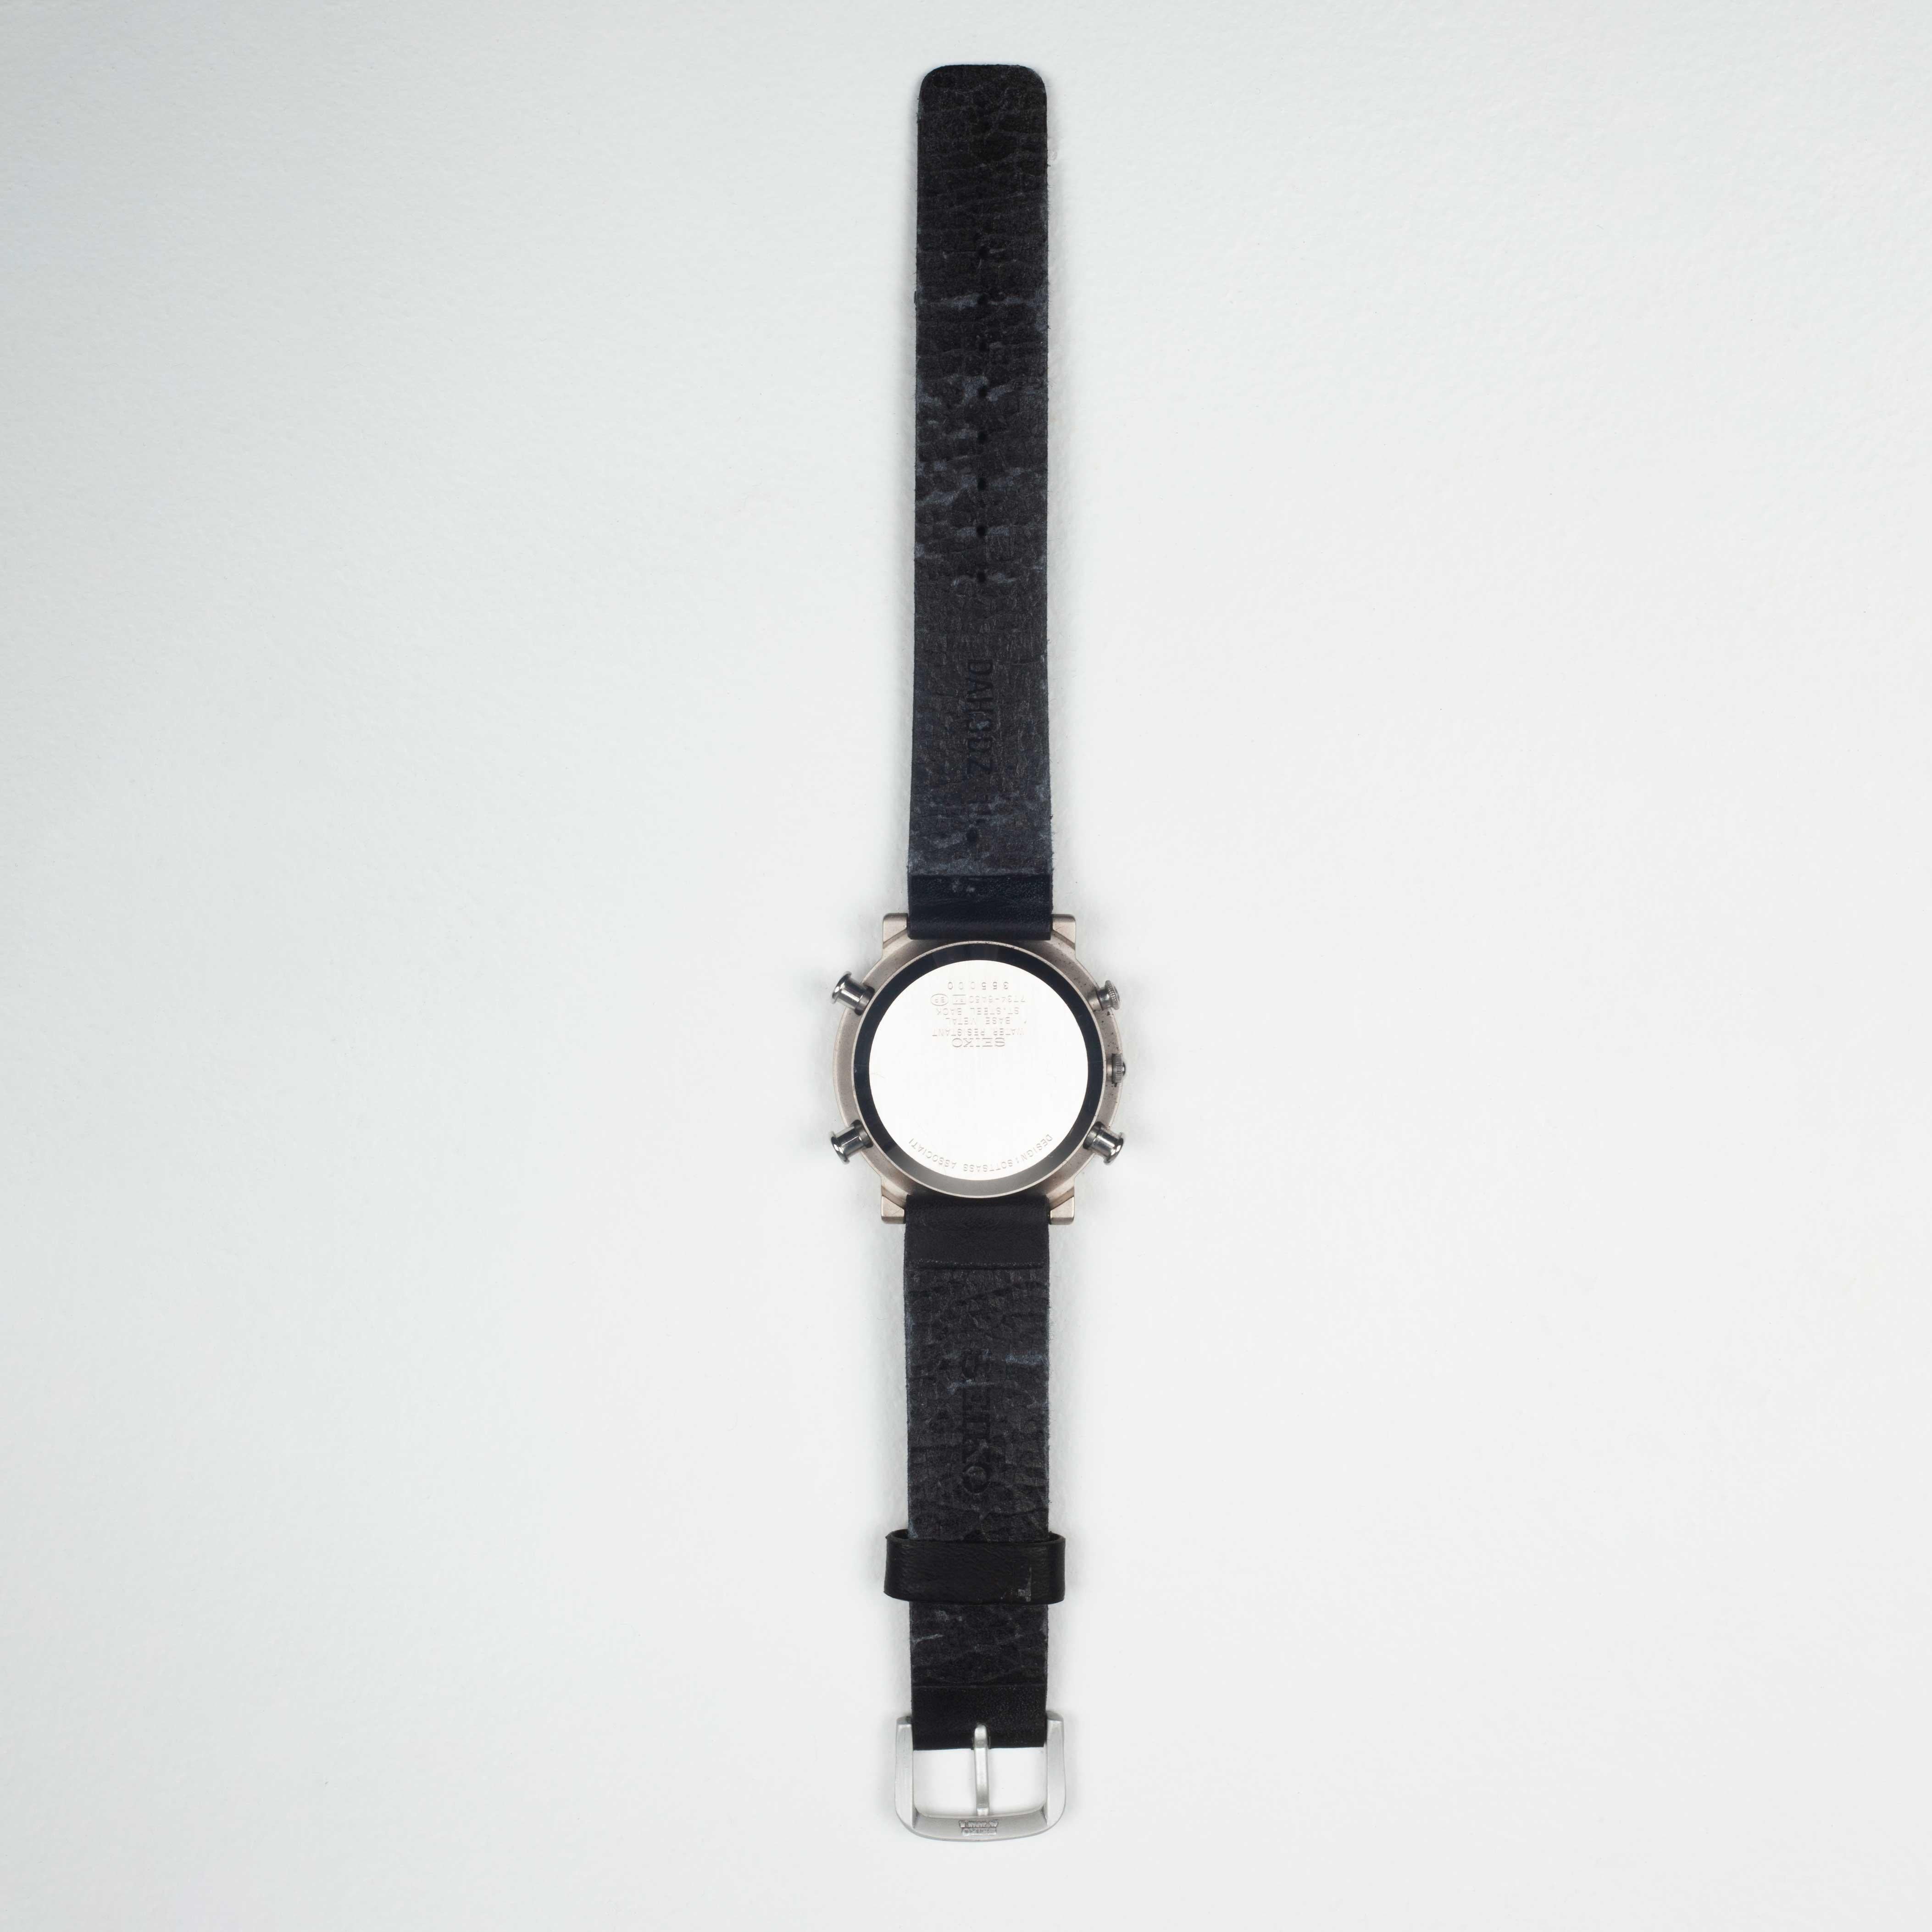 Japanese Ettore Sottsass Chronograph, Collection Sottsass for Seiko, Purple, Japan, 1993